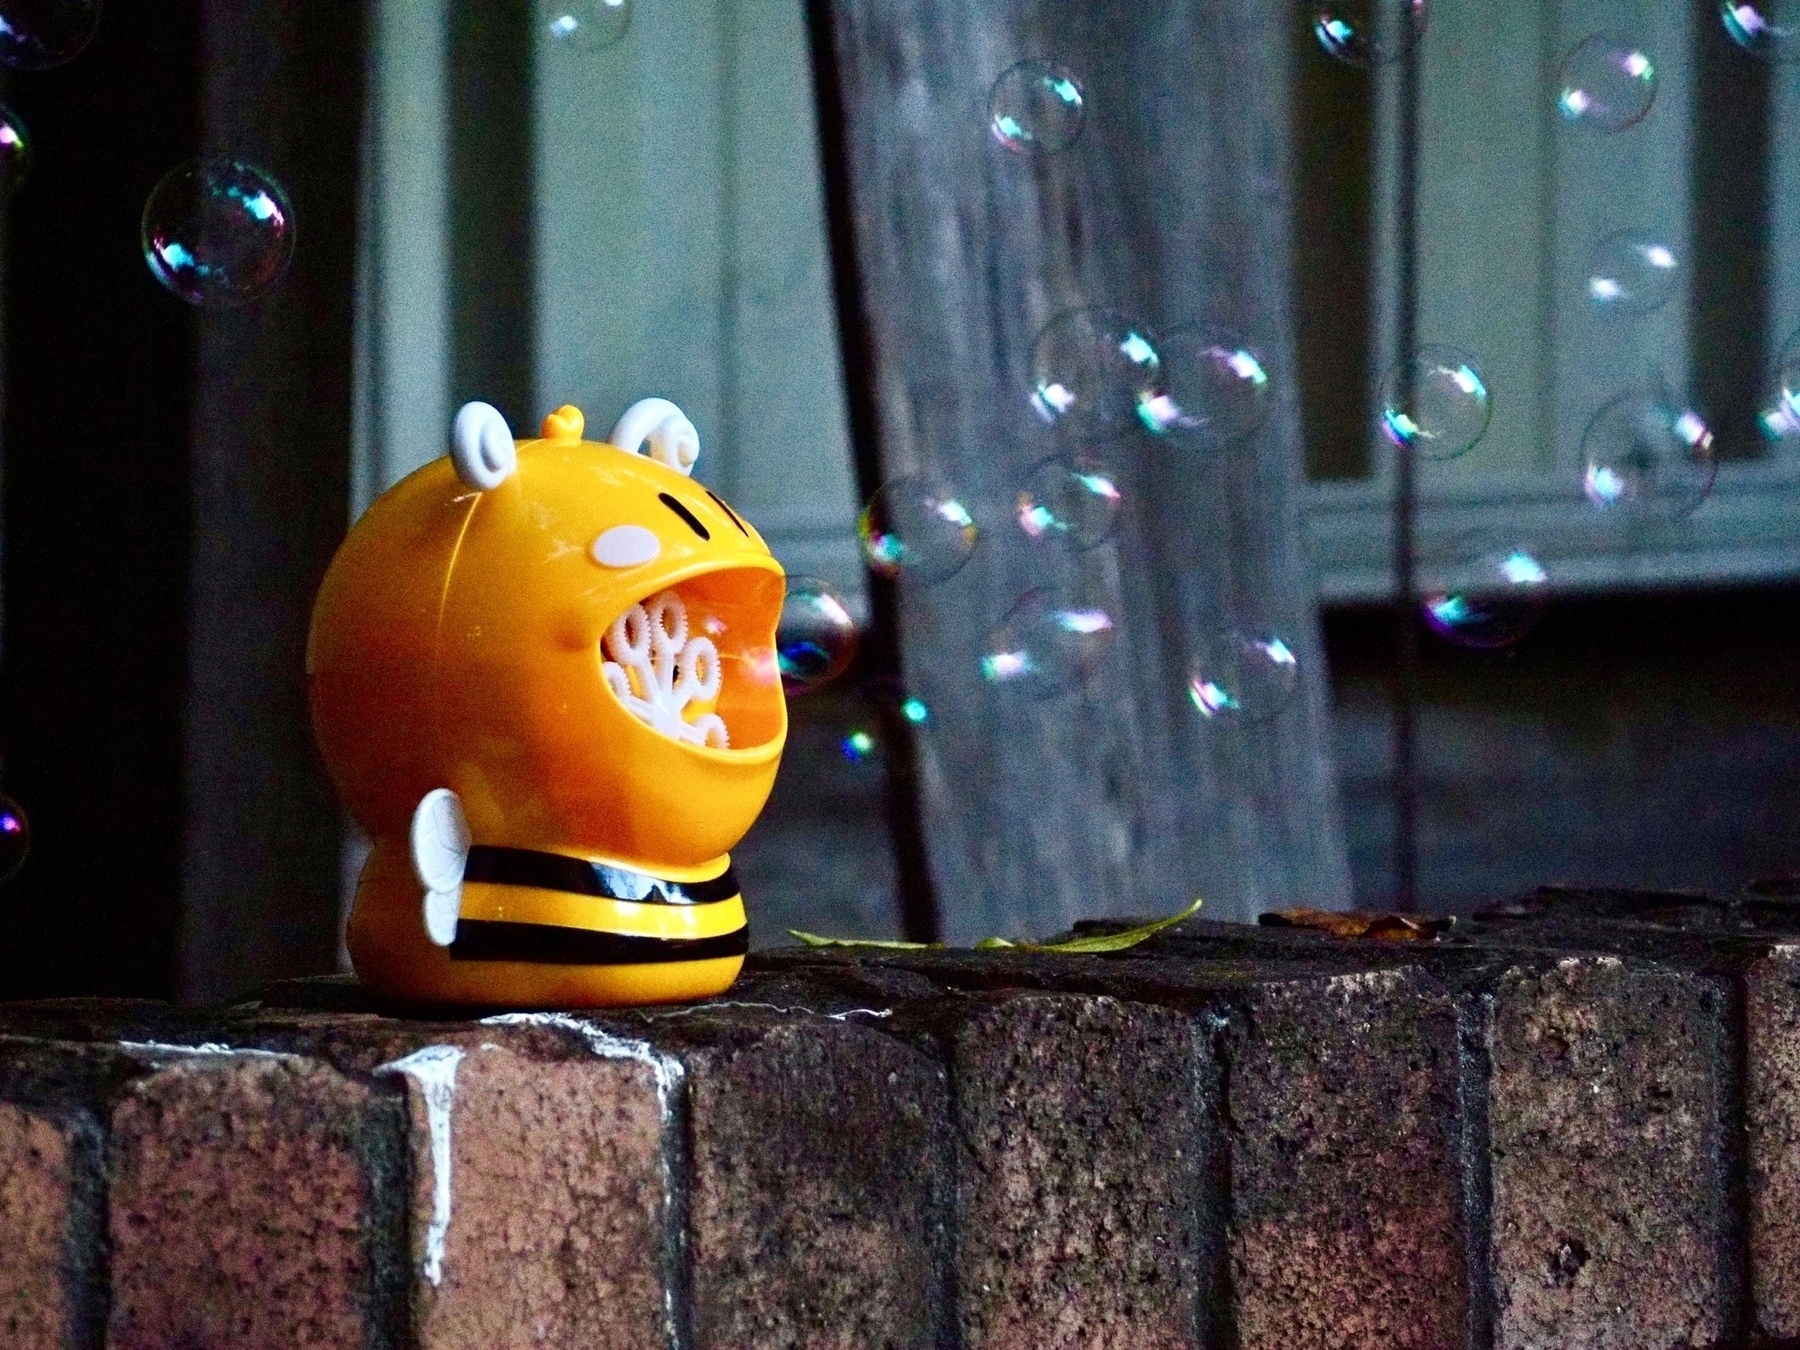 A yellow bubble machine in the shape of a bee sits on a brick retaining wall and spits bubbles out of its mouth.